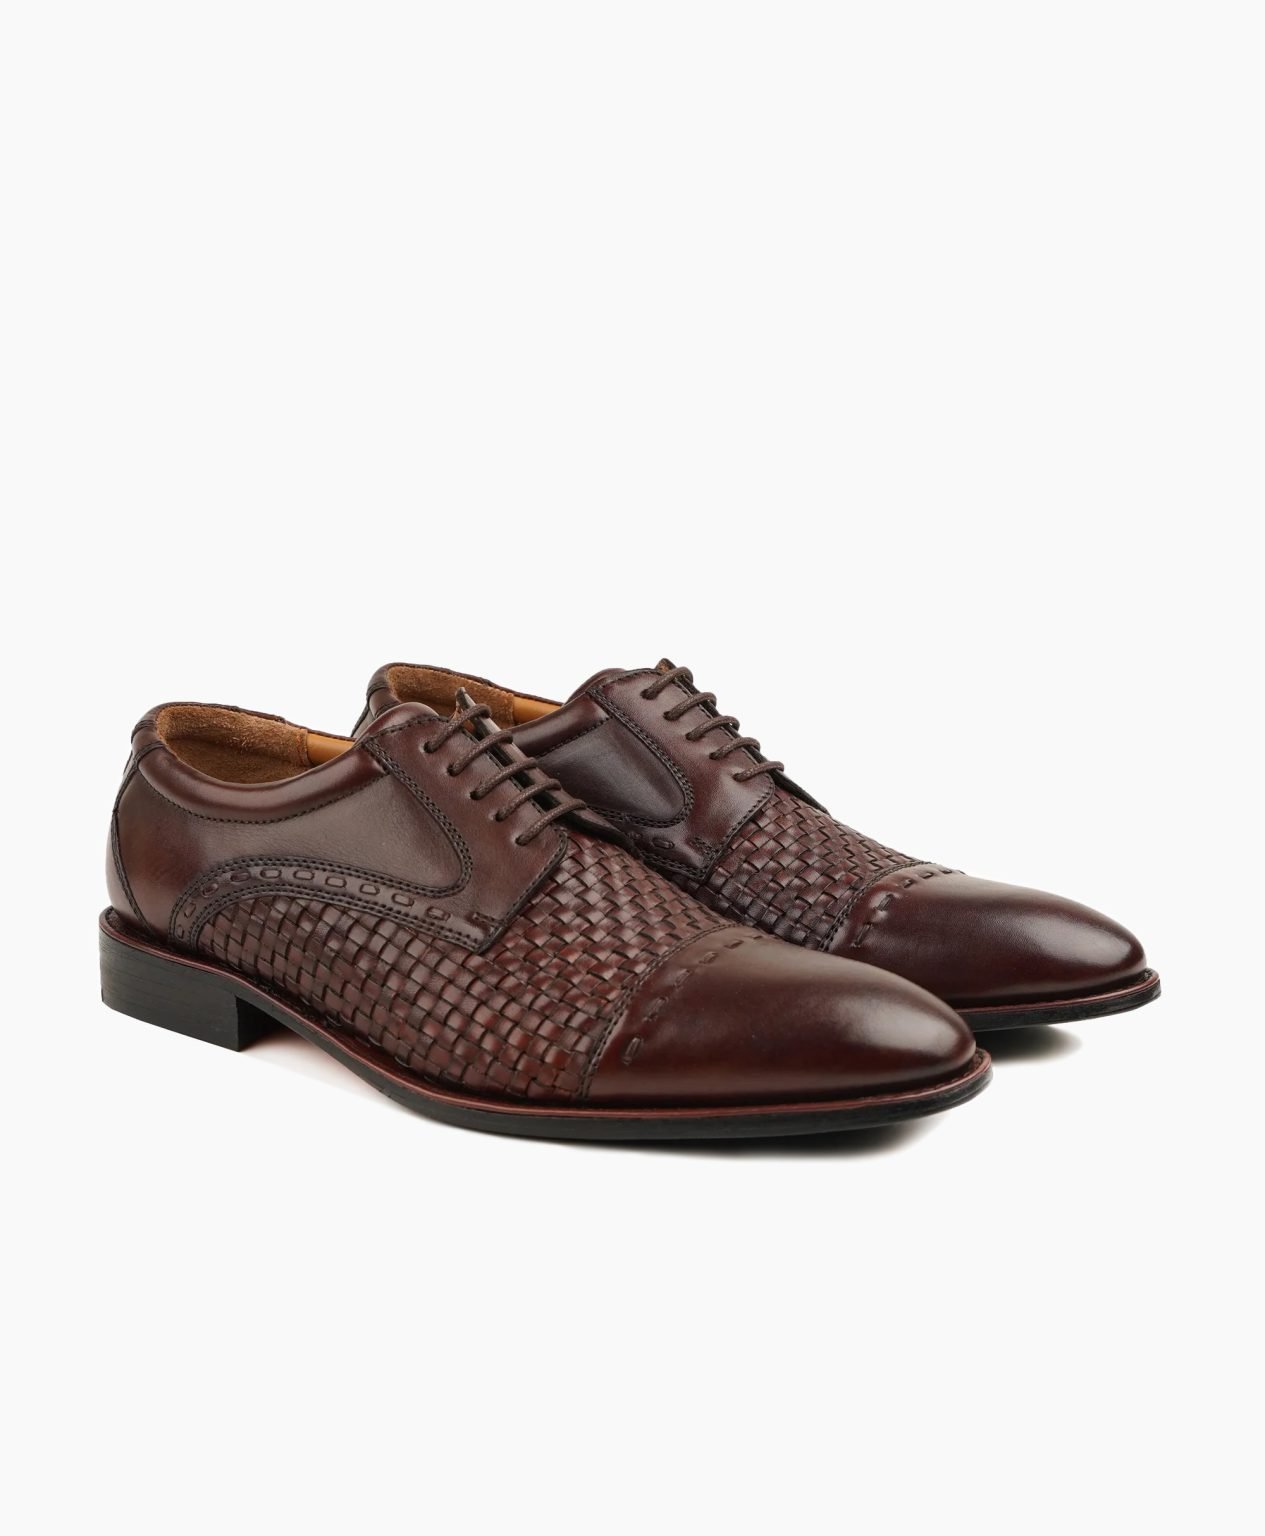 ashbourne-derby-brown-woven-leather-shoes-image200